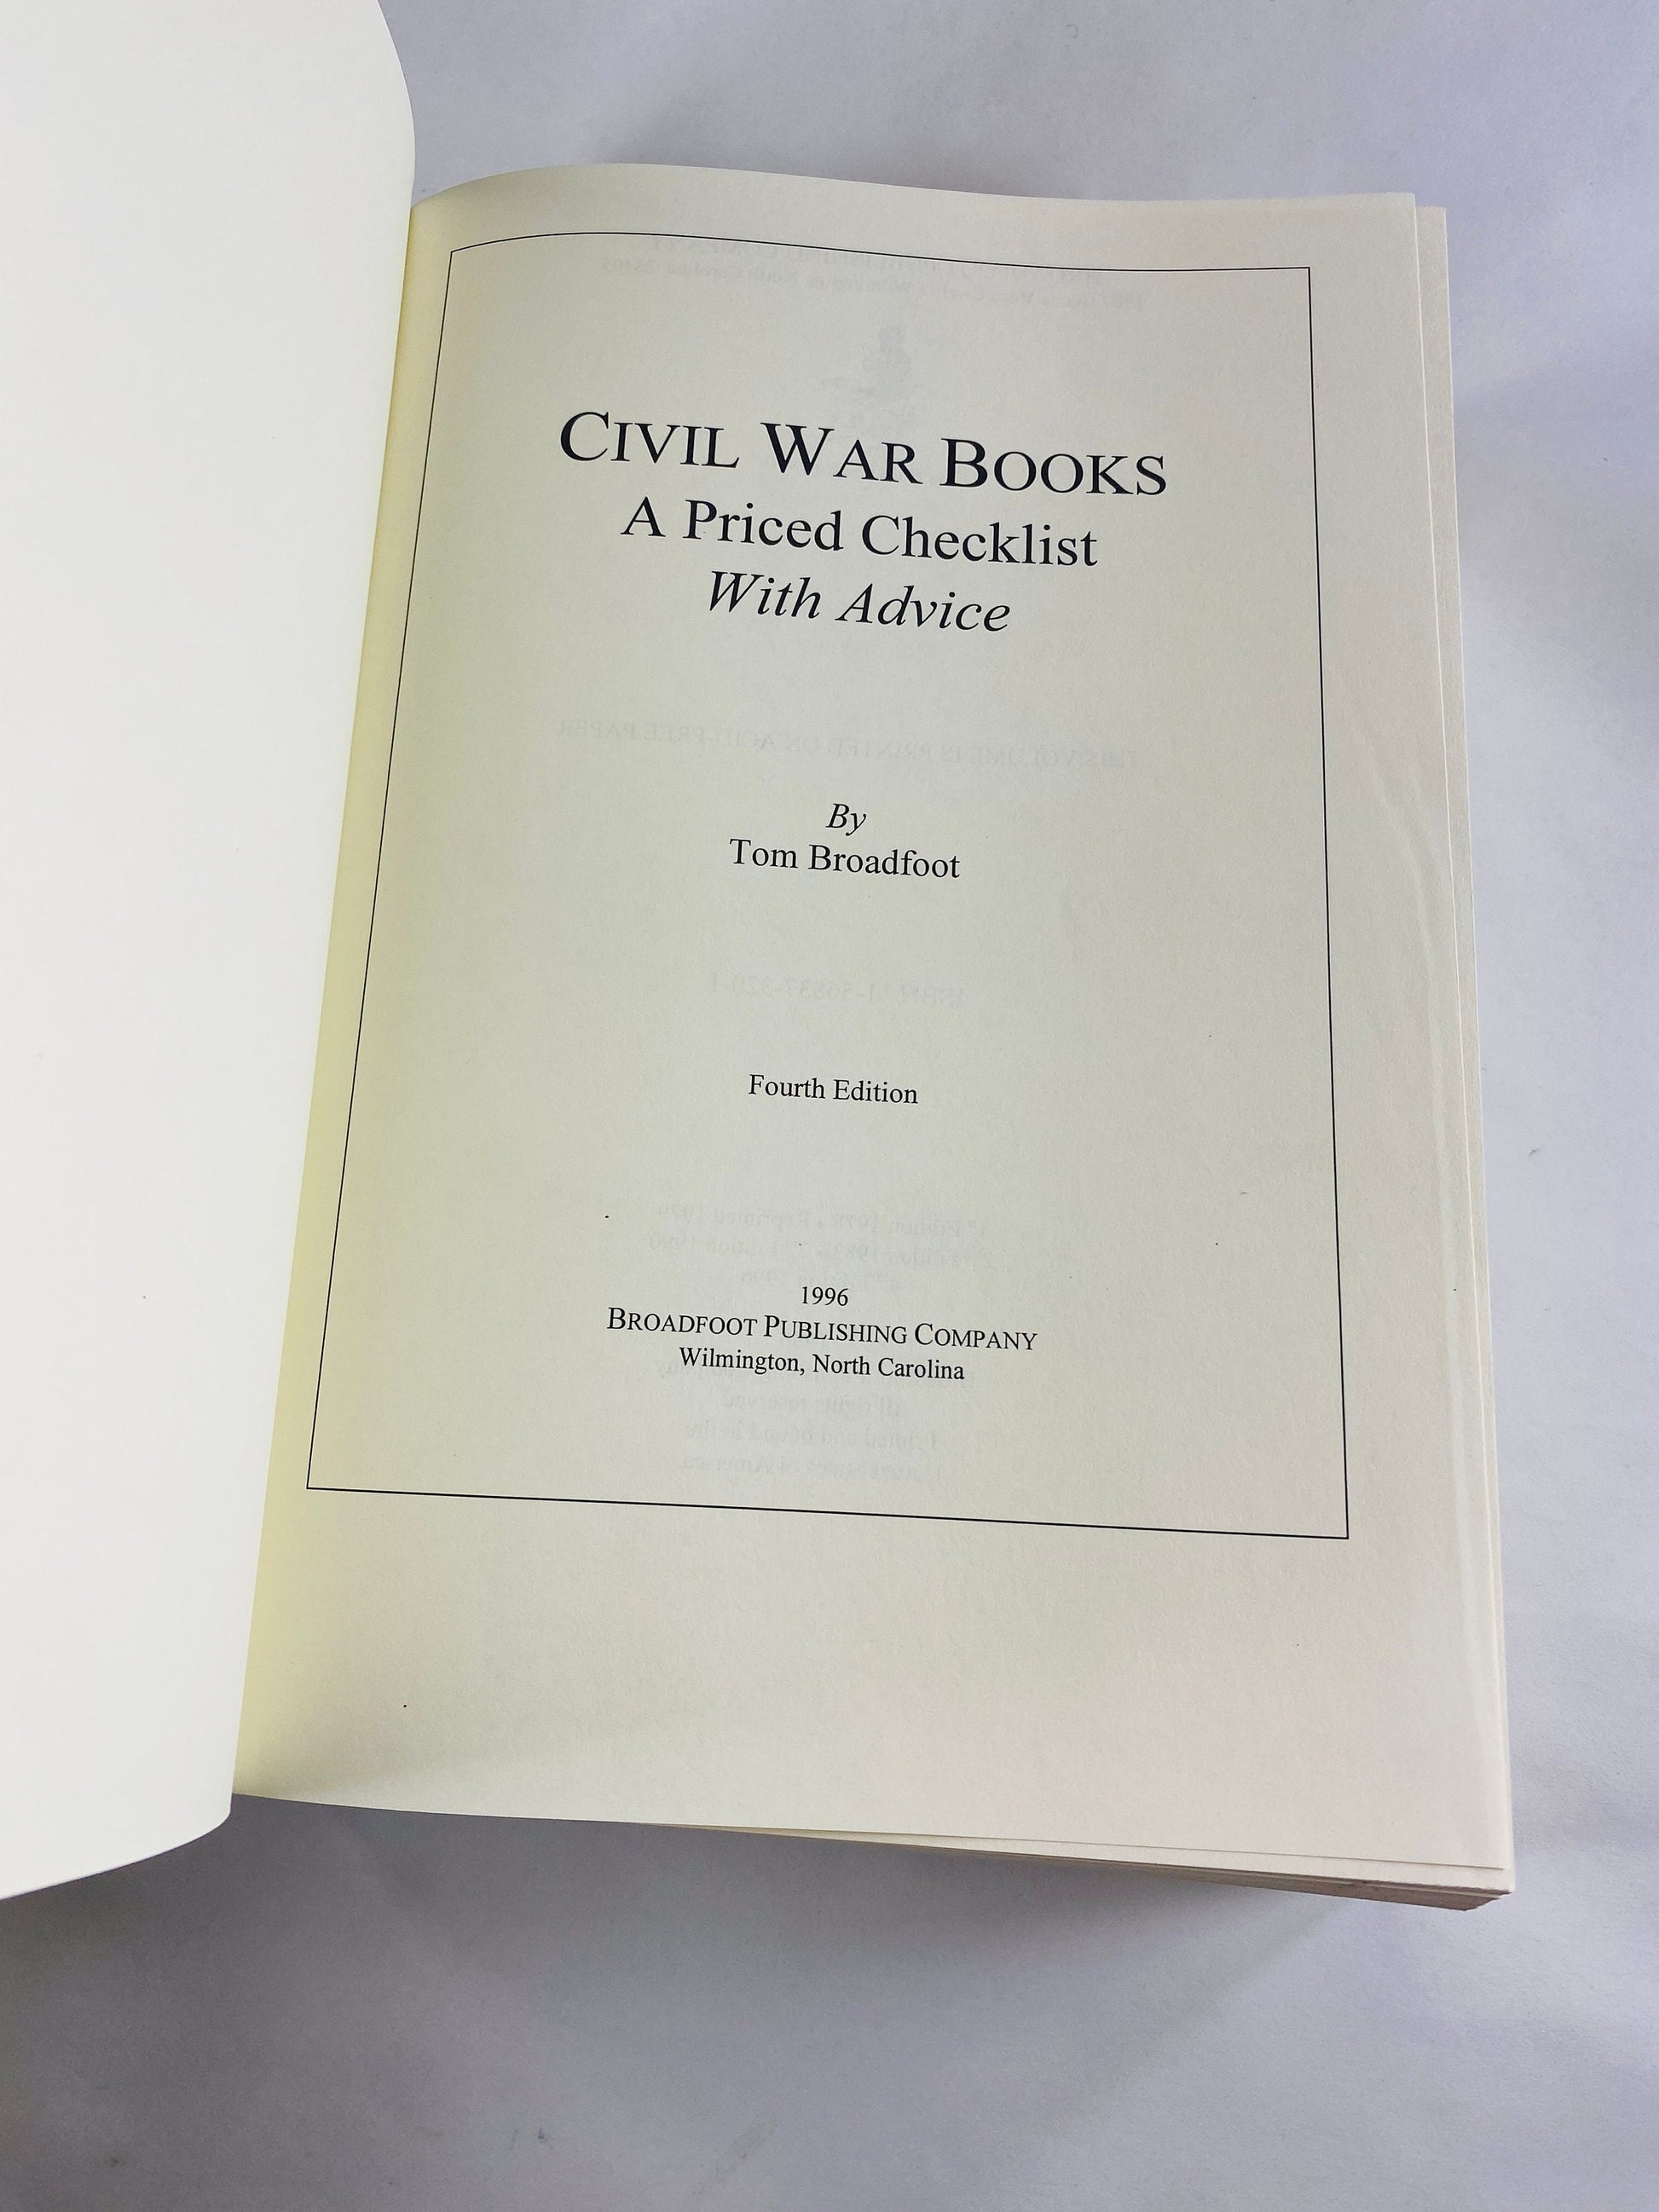 Civil War Books vintage collector's book by Tom Broadfoot HUGE priced checklist with advice reference manual